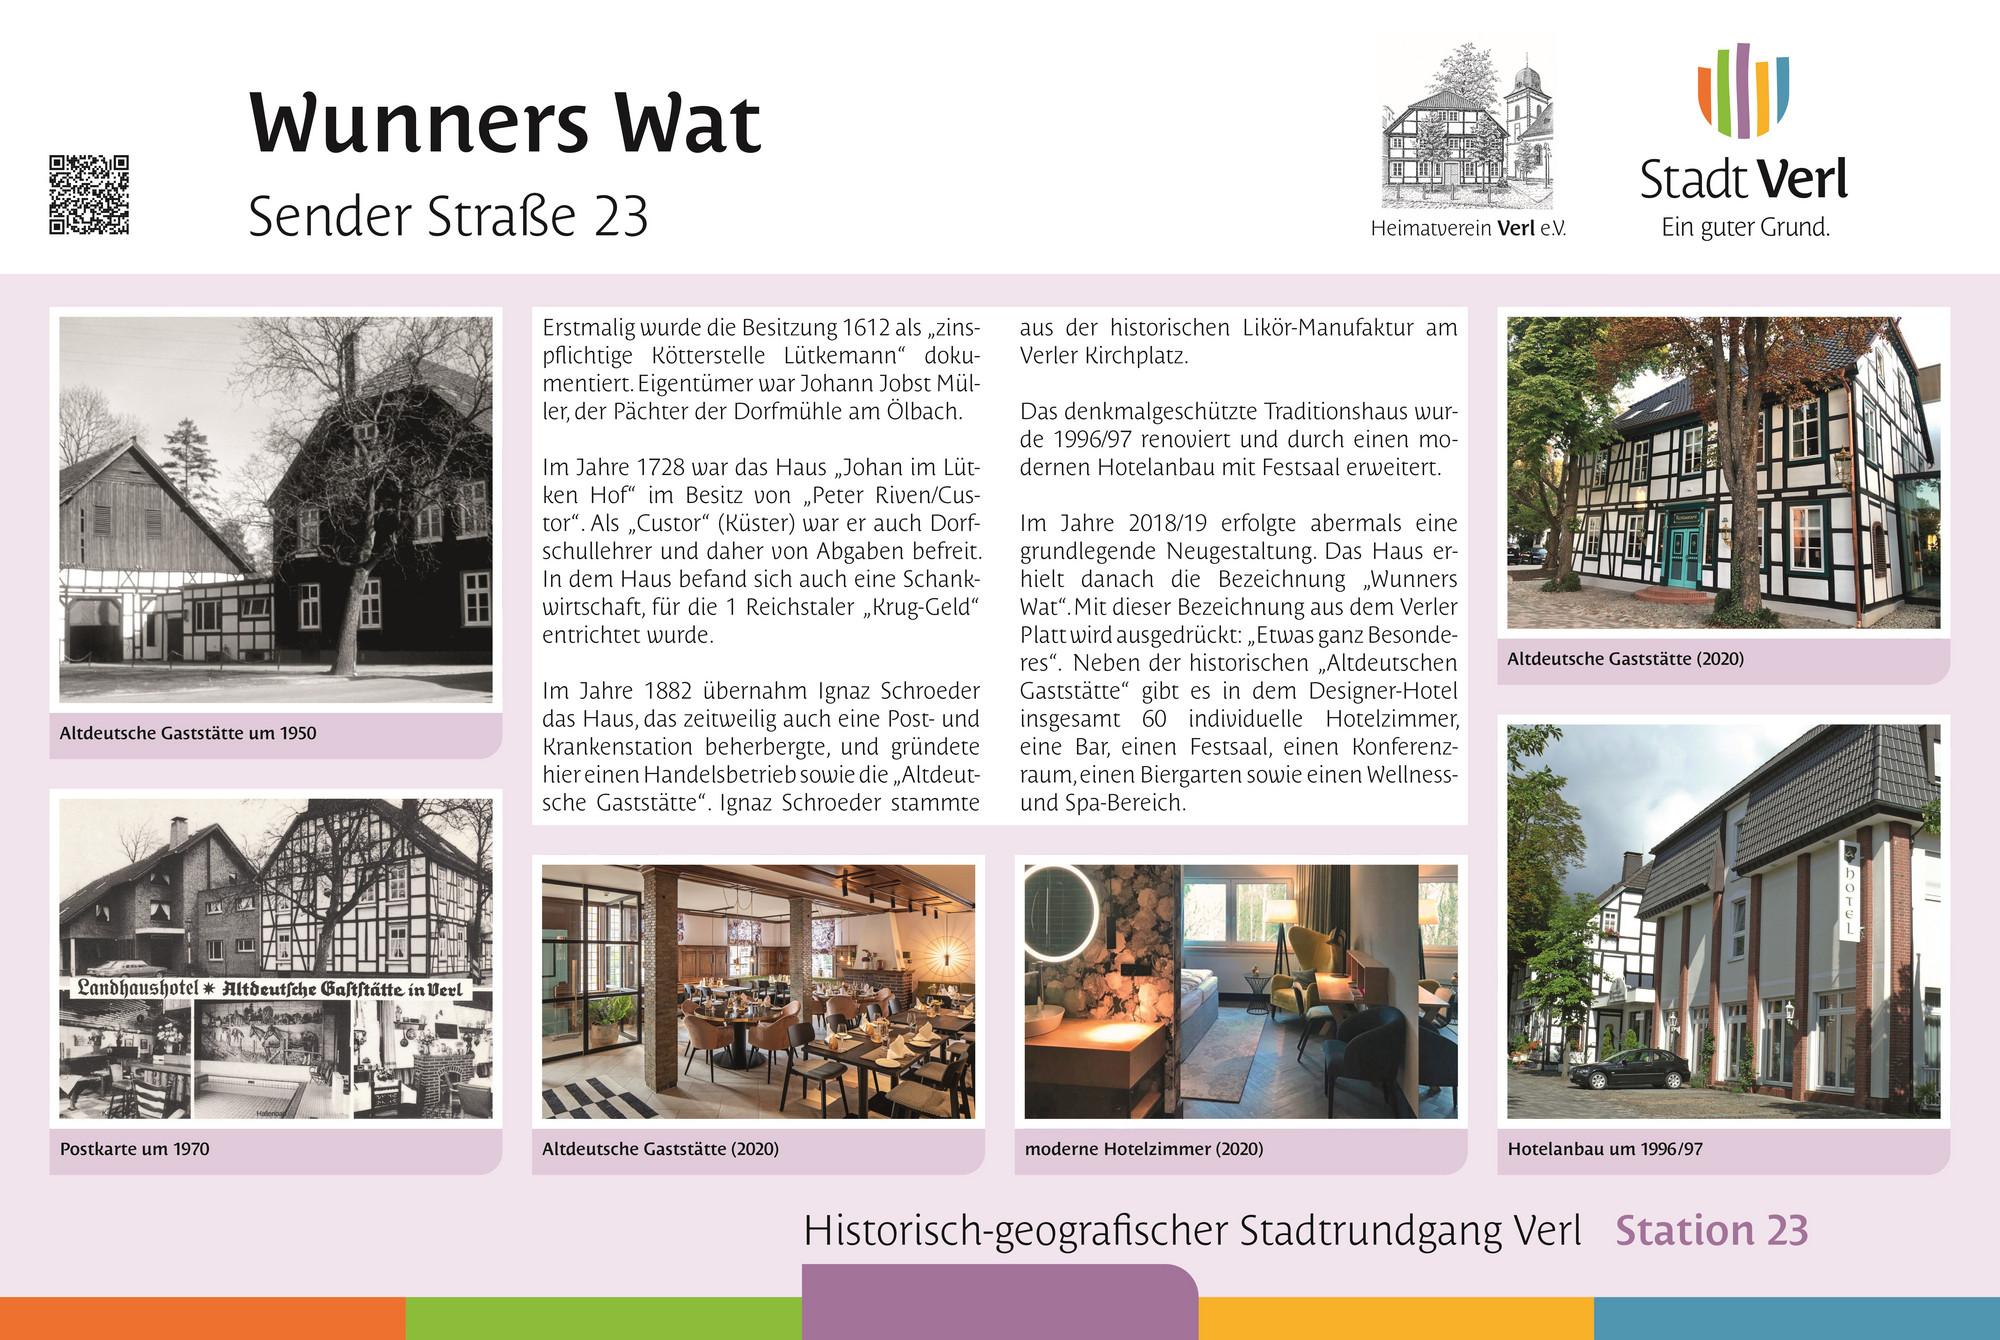 Station 23: Wunners Wat